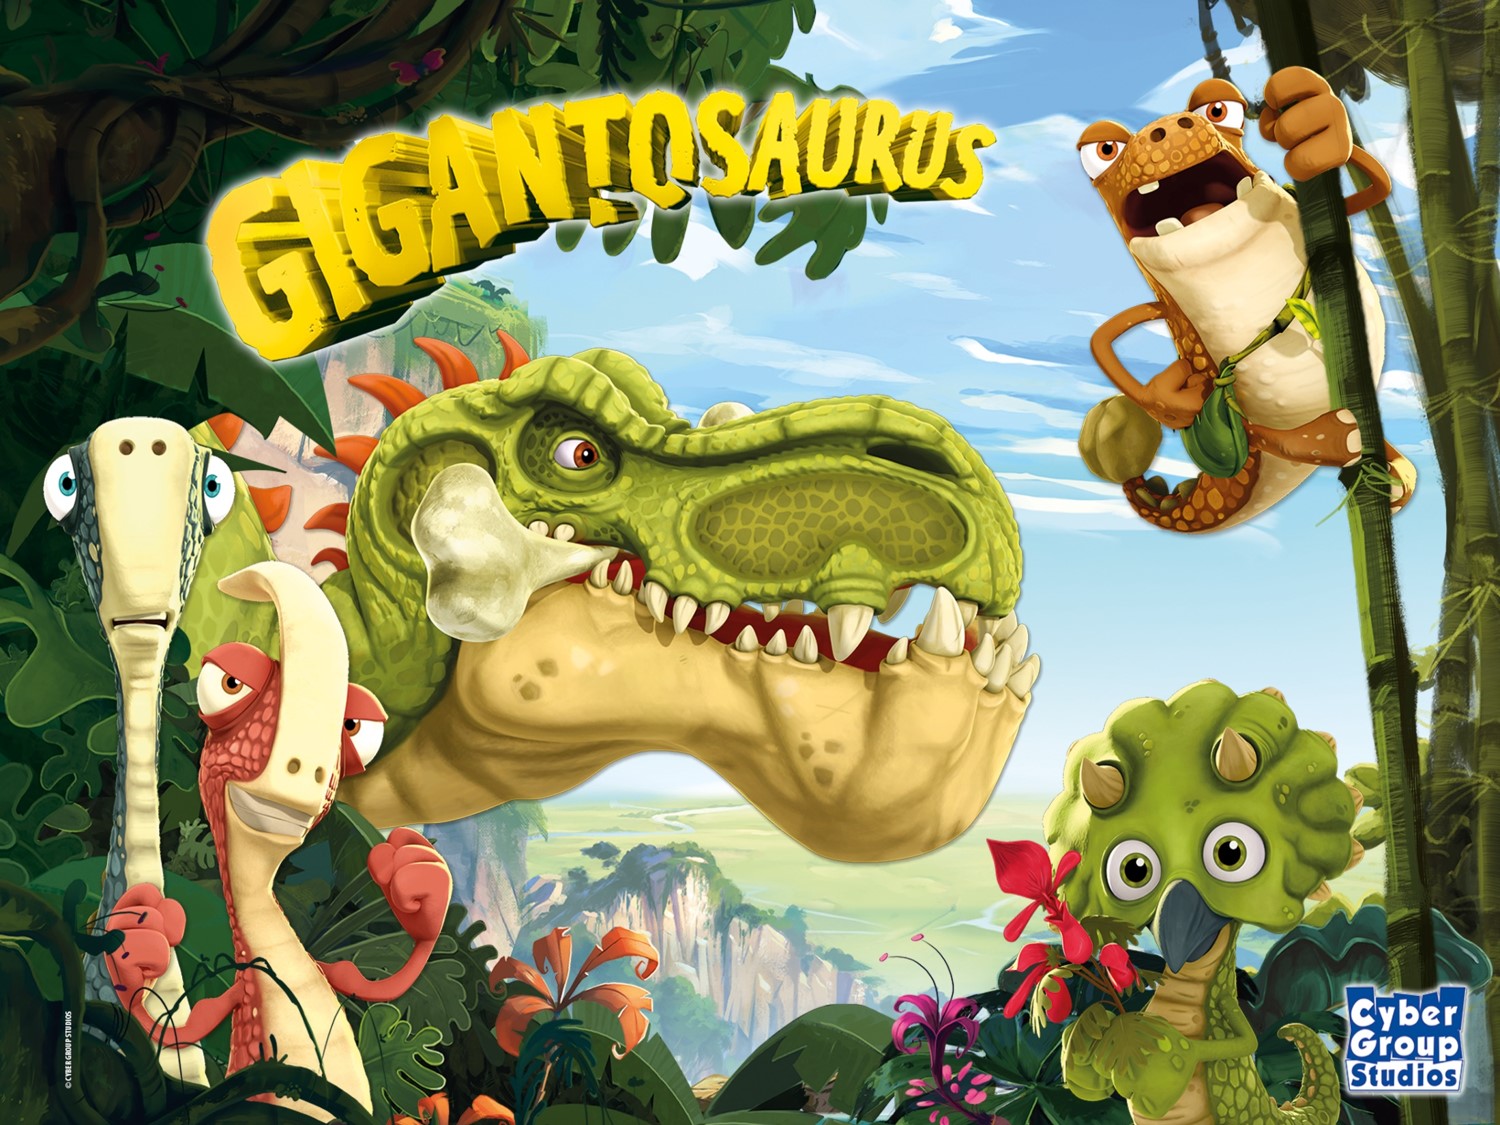 First two licensing agreements for Gigantosaurus in the Italian market image